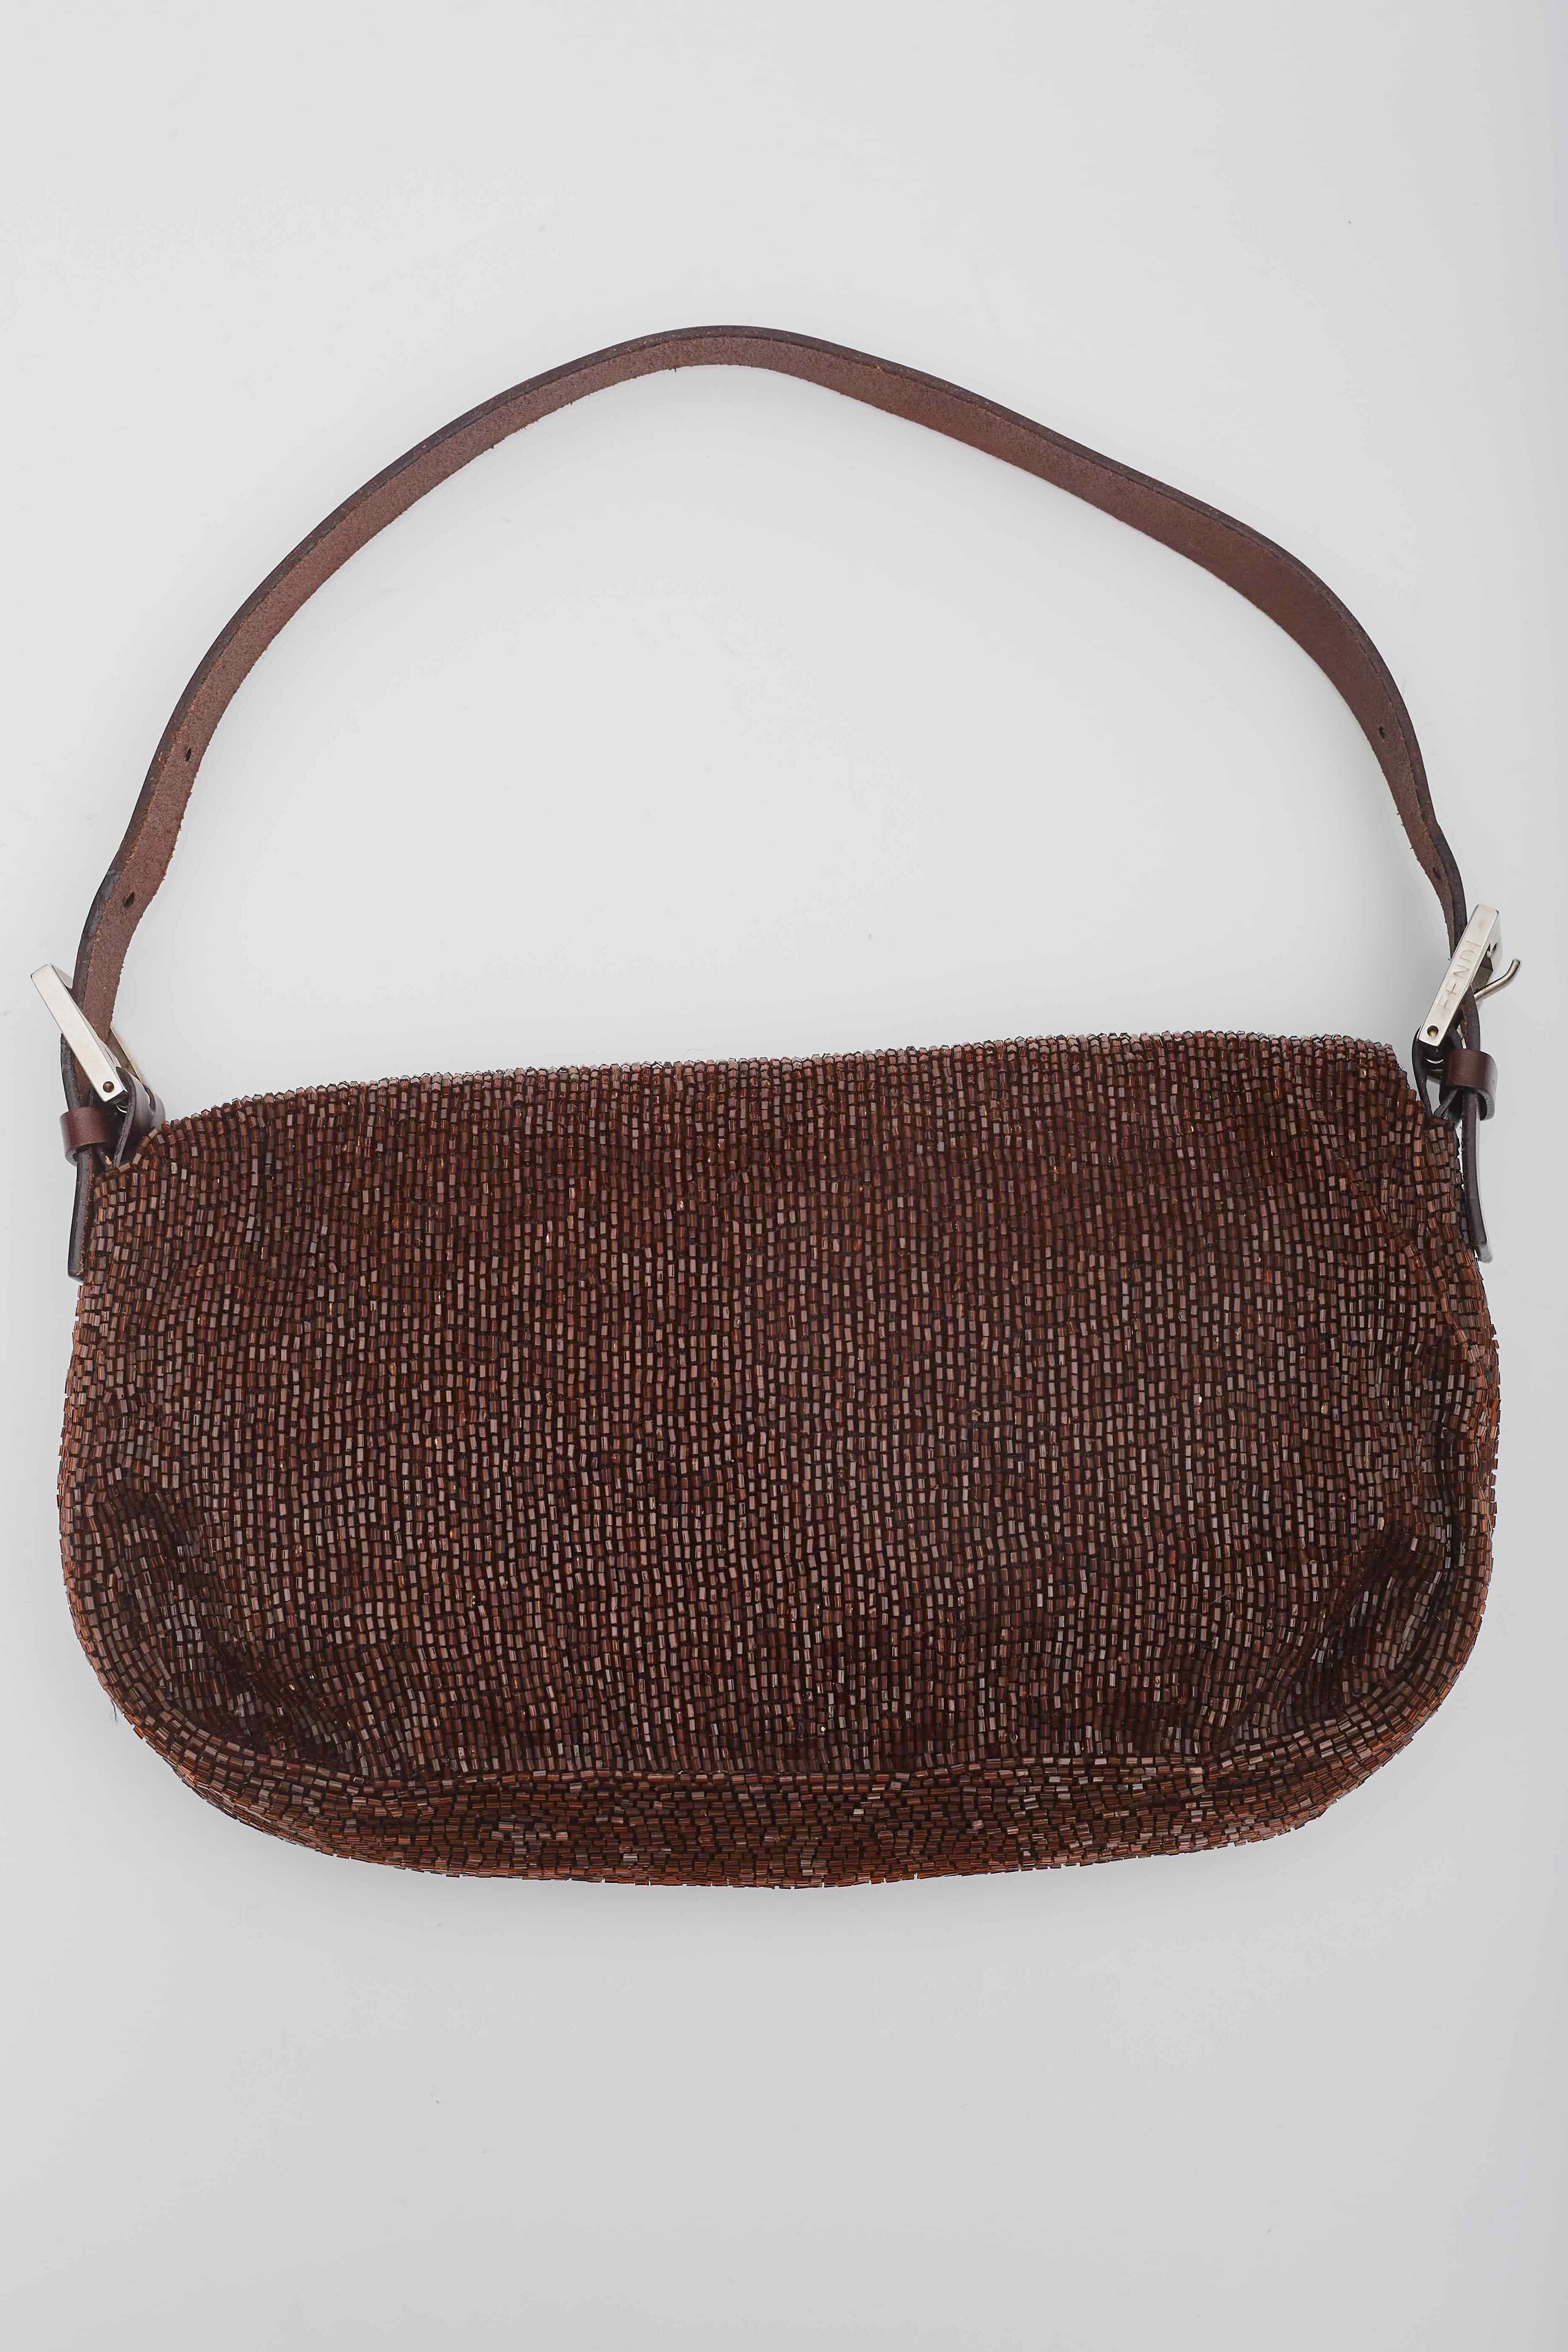 Color: Brown
Material: Beads
Code: 26424
Measures: Height 6” x Length 10” x Depth 2”
Drop: 7”
Comes with: Dust bag
Condition: faint hairline scratches.

Made in Italy